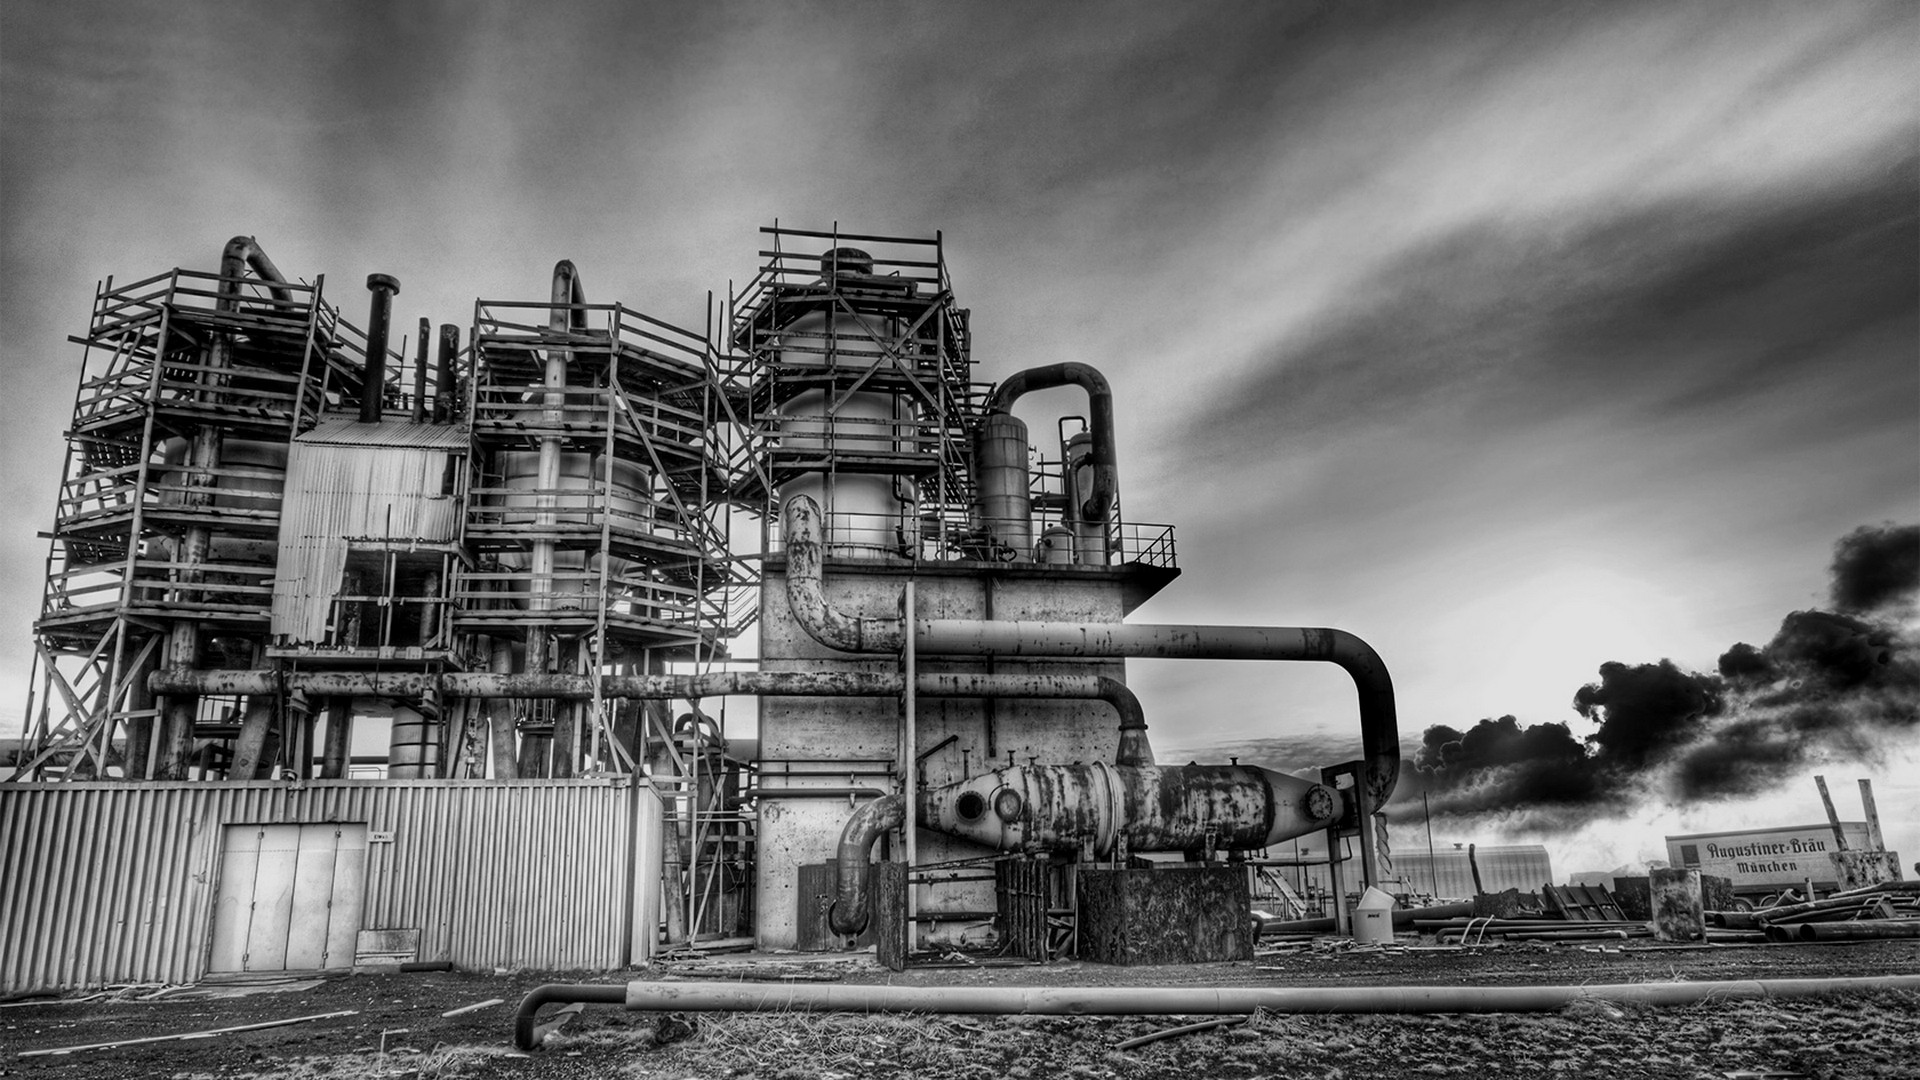 tablet wallpaper,industry,black and white,monochrome photography,iron,monochrome